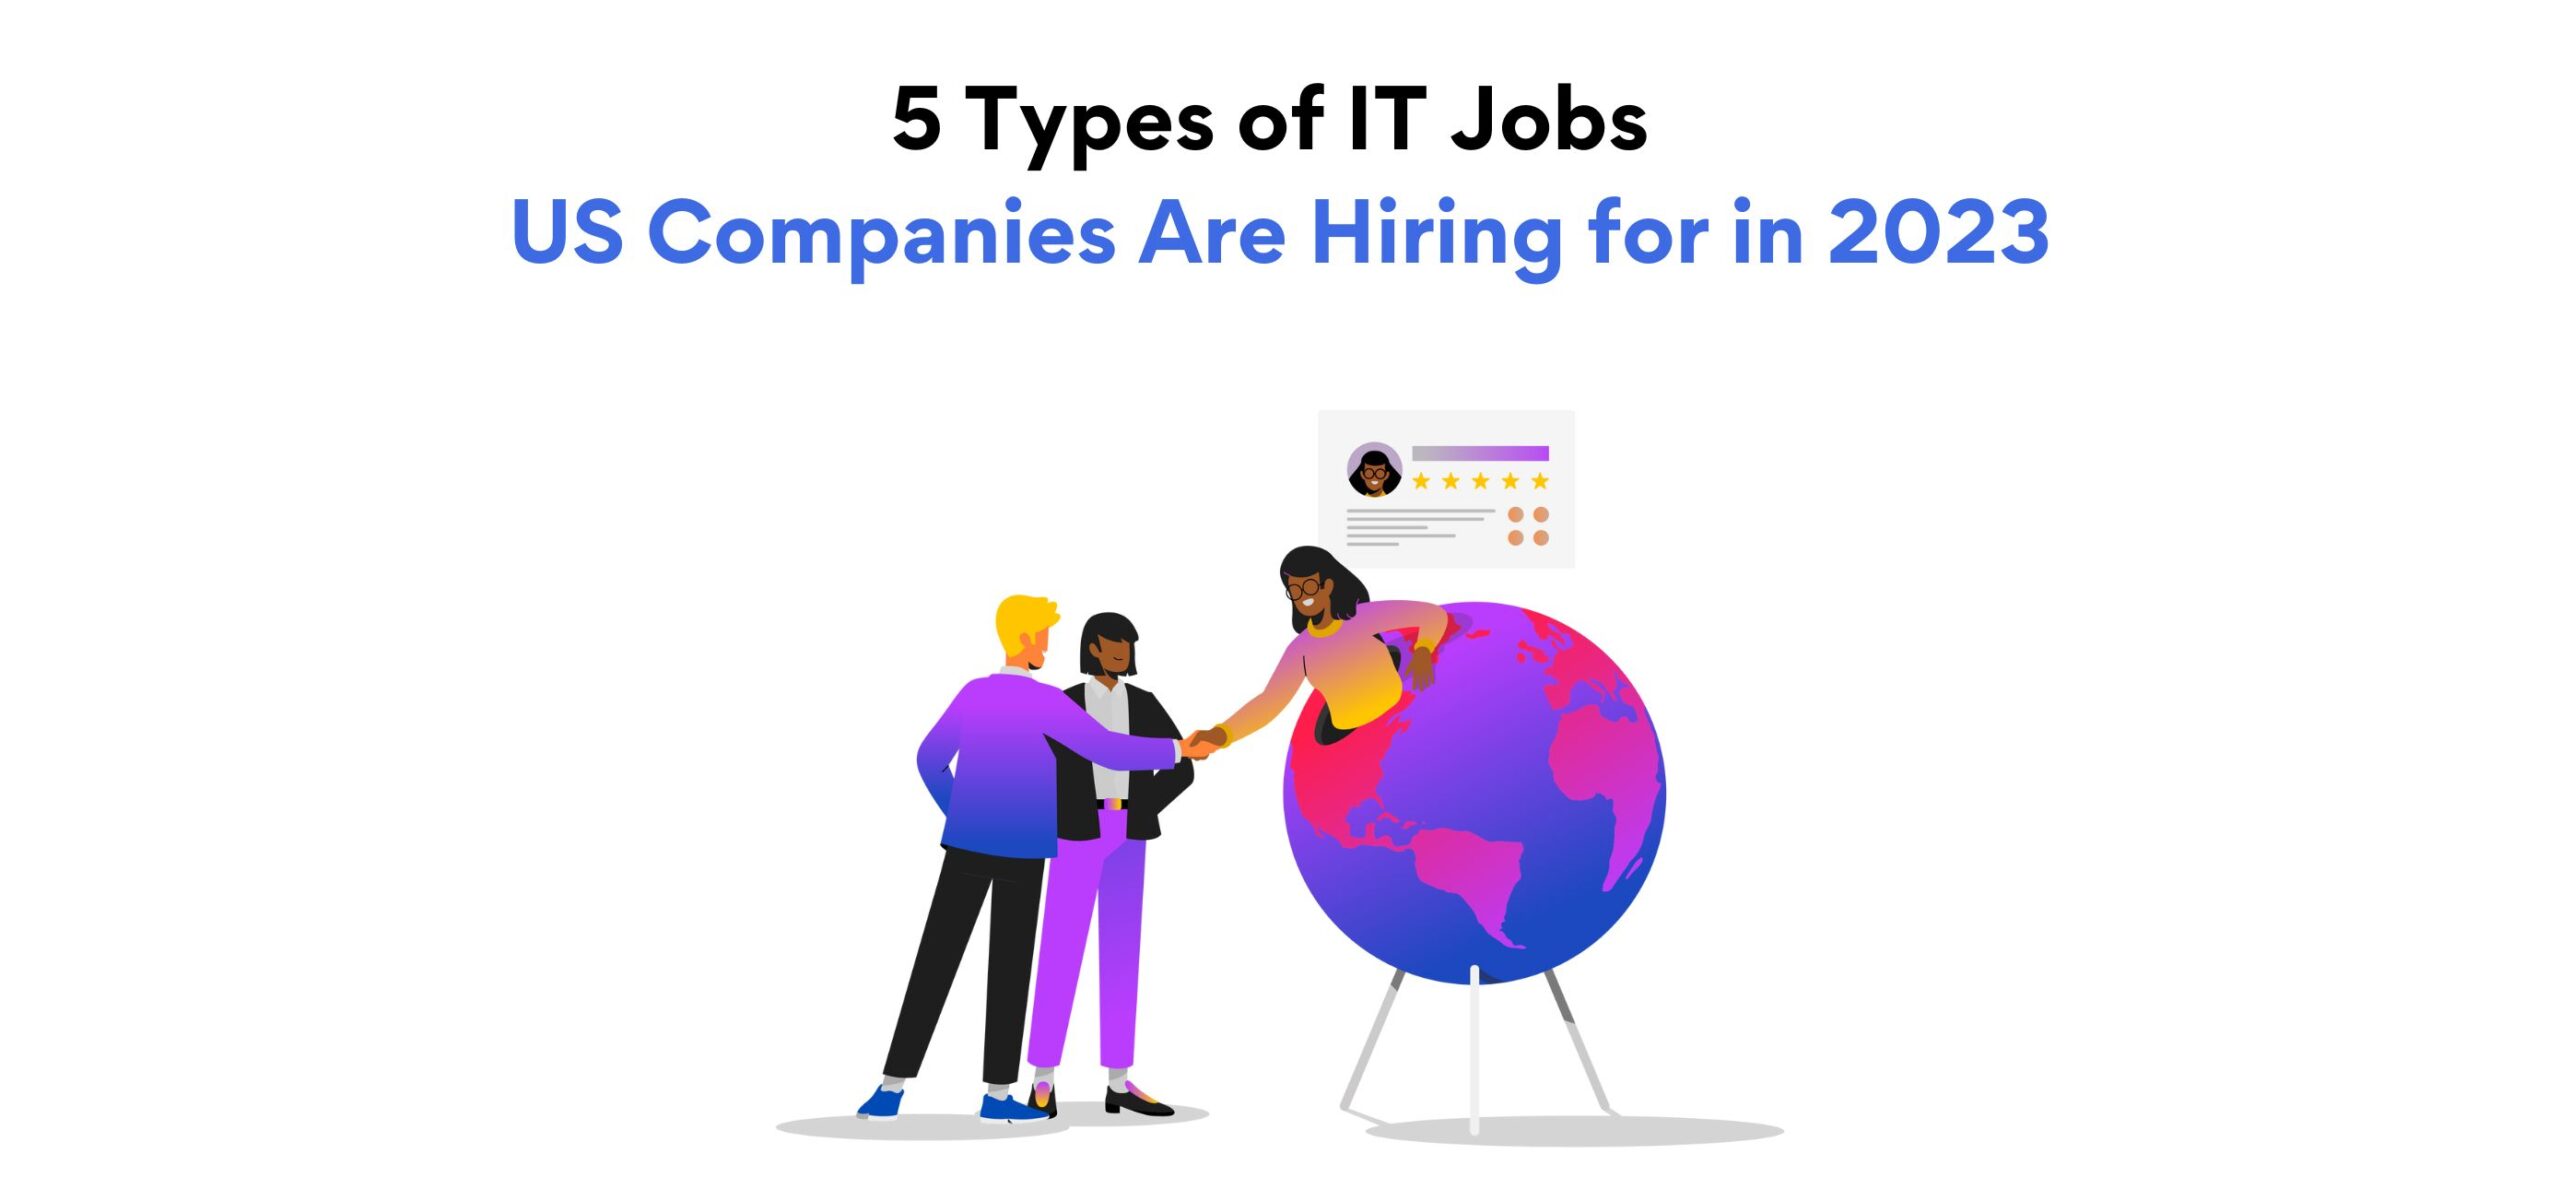 5 Types of IT Jobs US Companies Are Hiring for in 2023